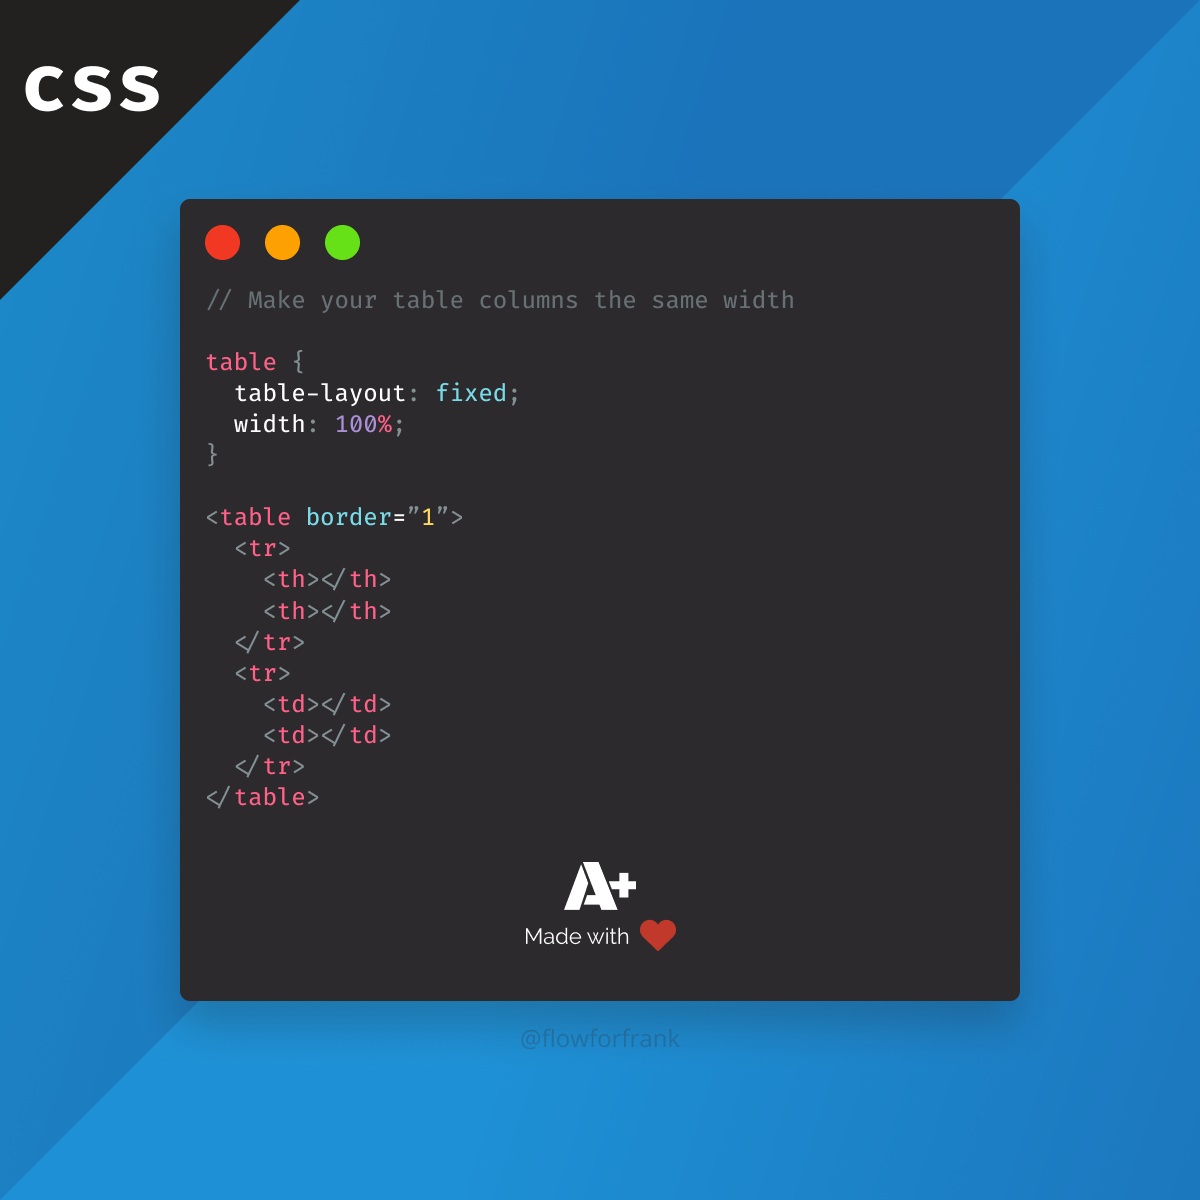 How to make table columns same width in CSS